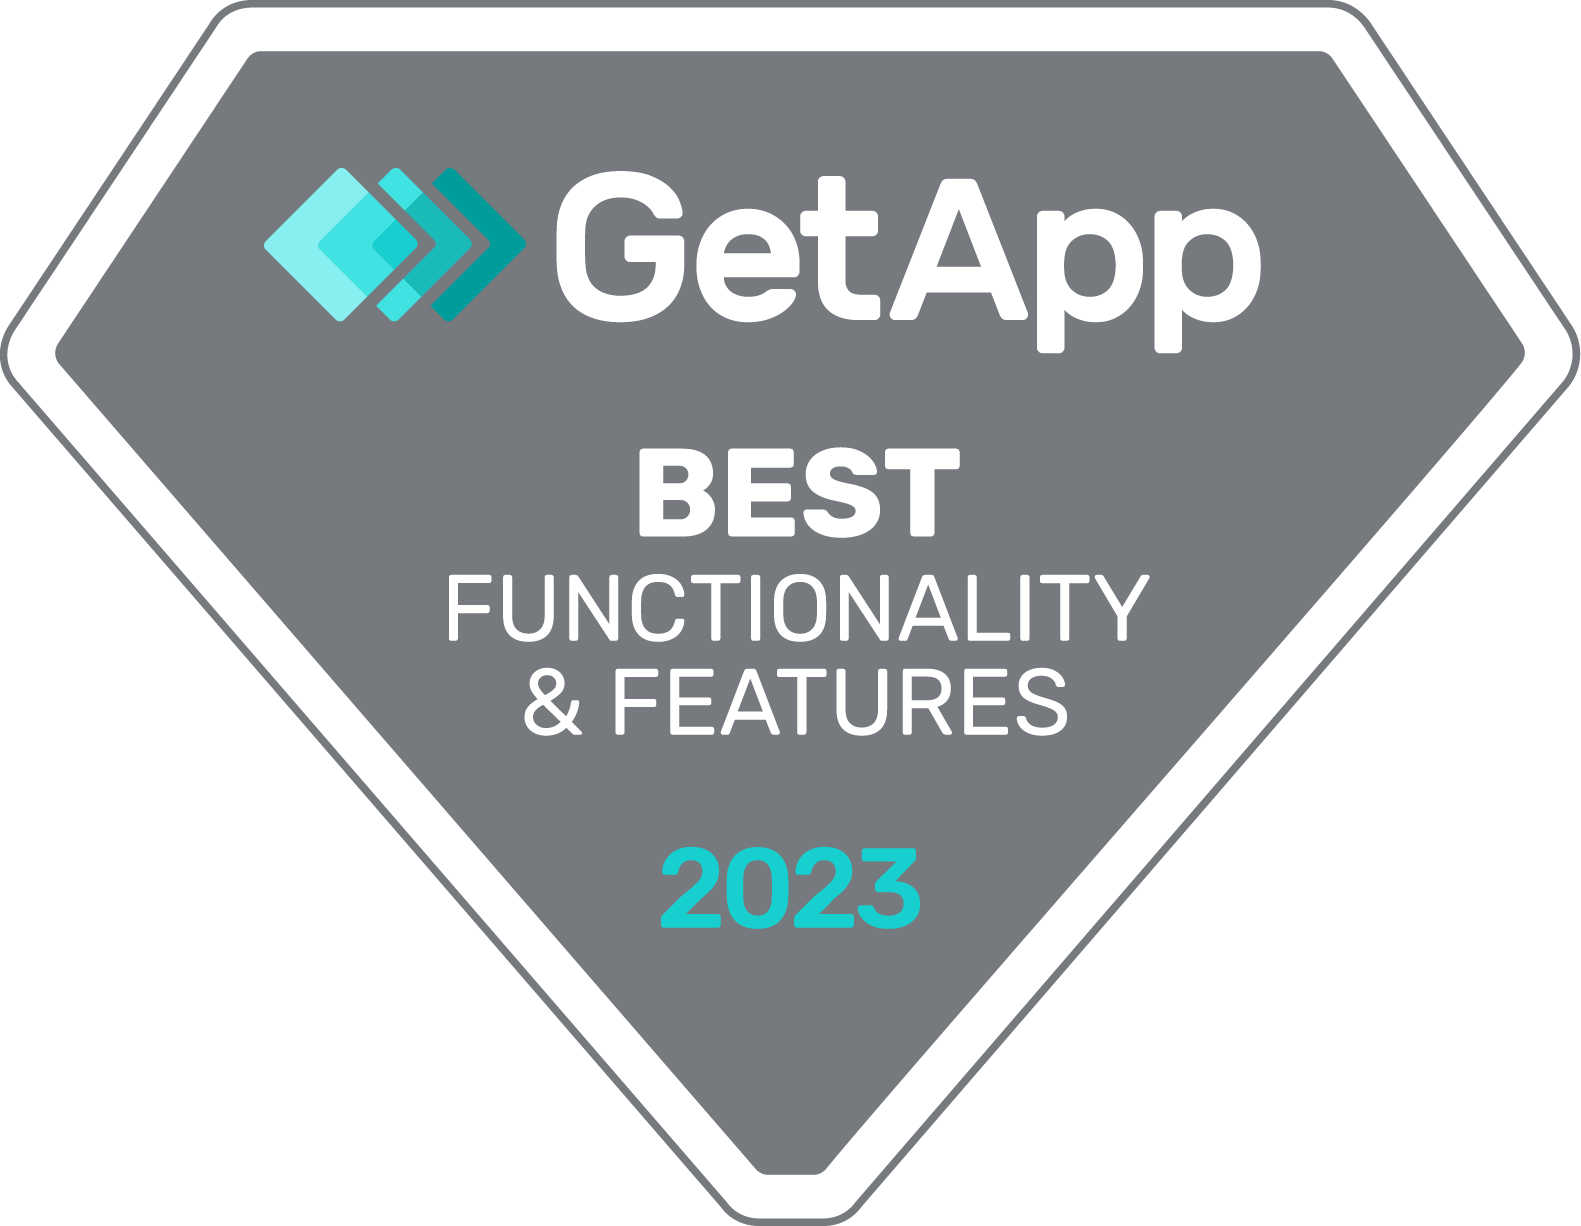 ga-features_and_functionality-2023